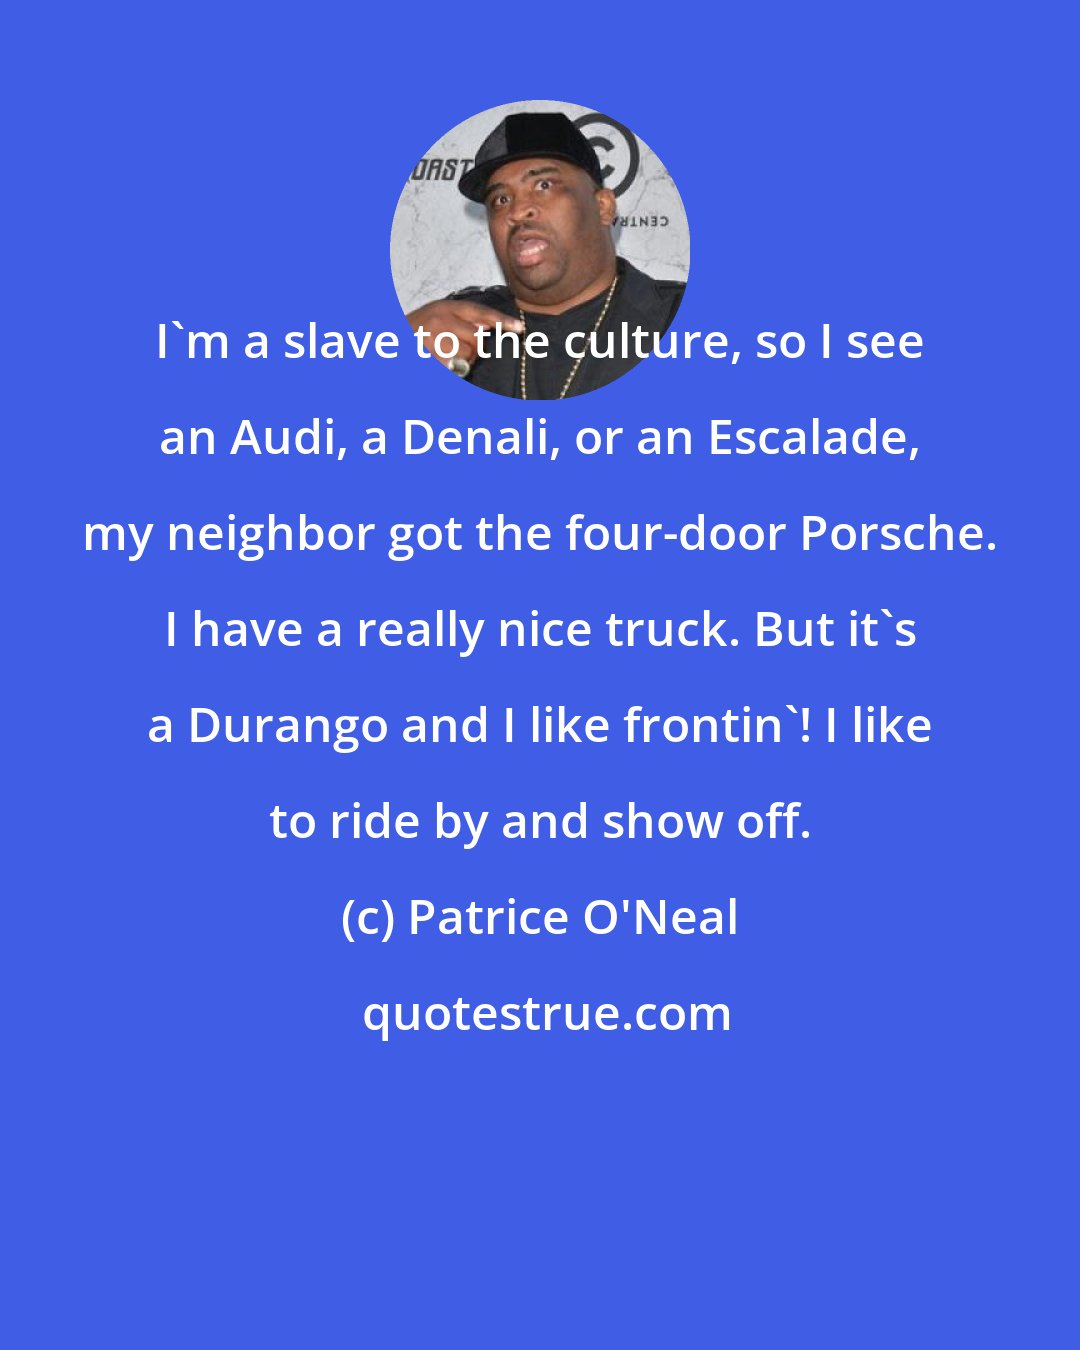 Patrice O'Neal: I'm a slave to the culture, so I see an Audi, a Denali, or an Escalade, my neighbor got the four-door Porsche. I have a really nice truck. But it's a Durango and I like frontin'! I like to ride by and show off.